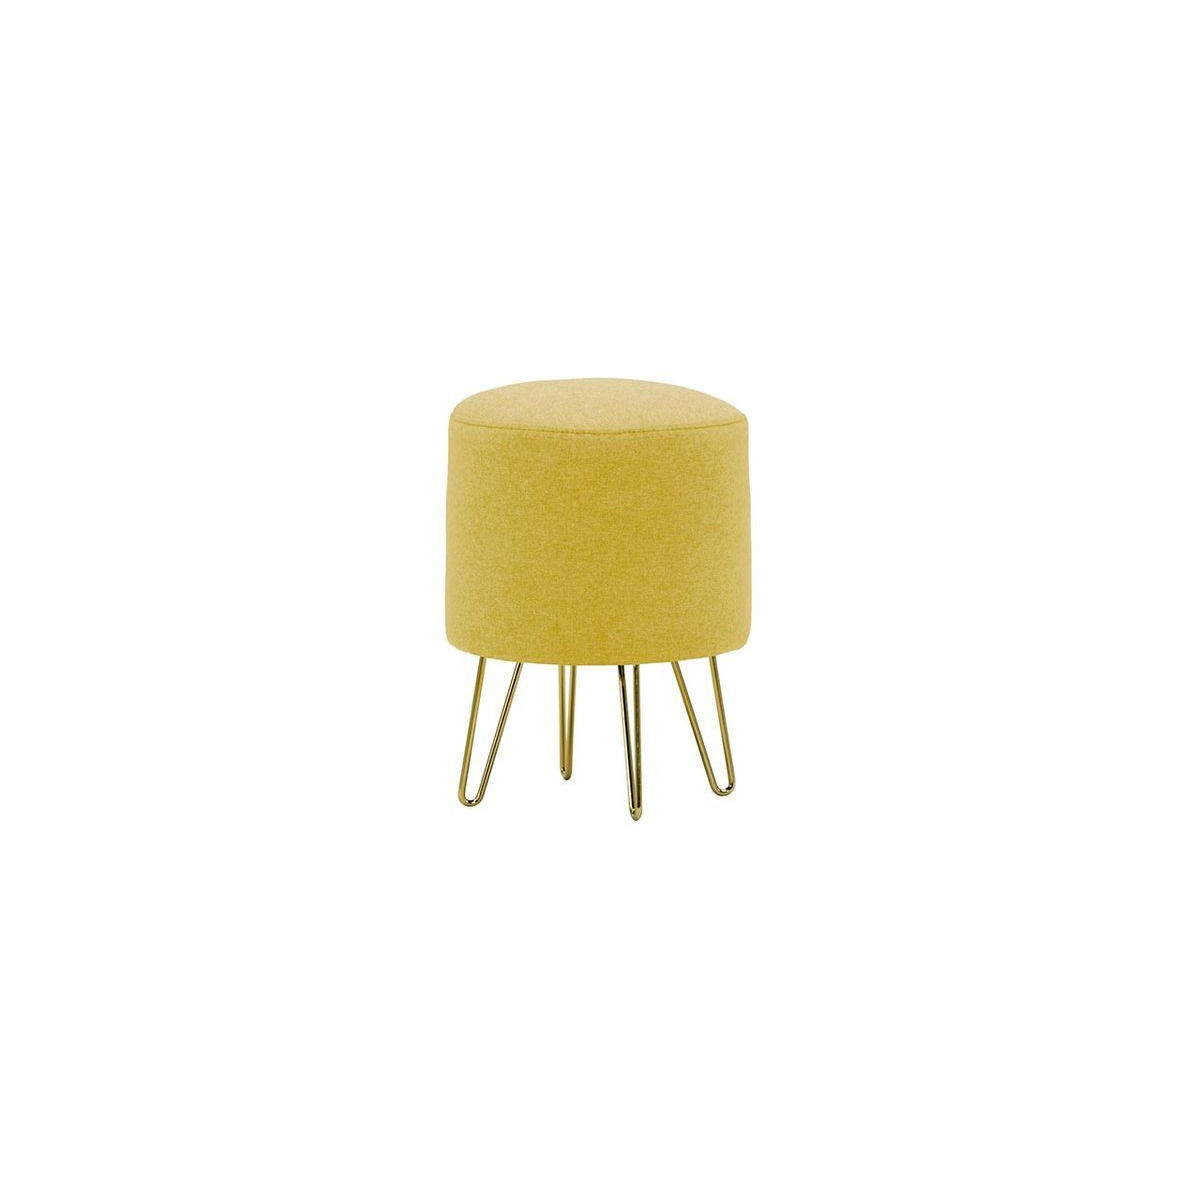 Flair Small Round Pouffe Metal Legs, yellow - image 1